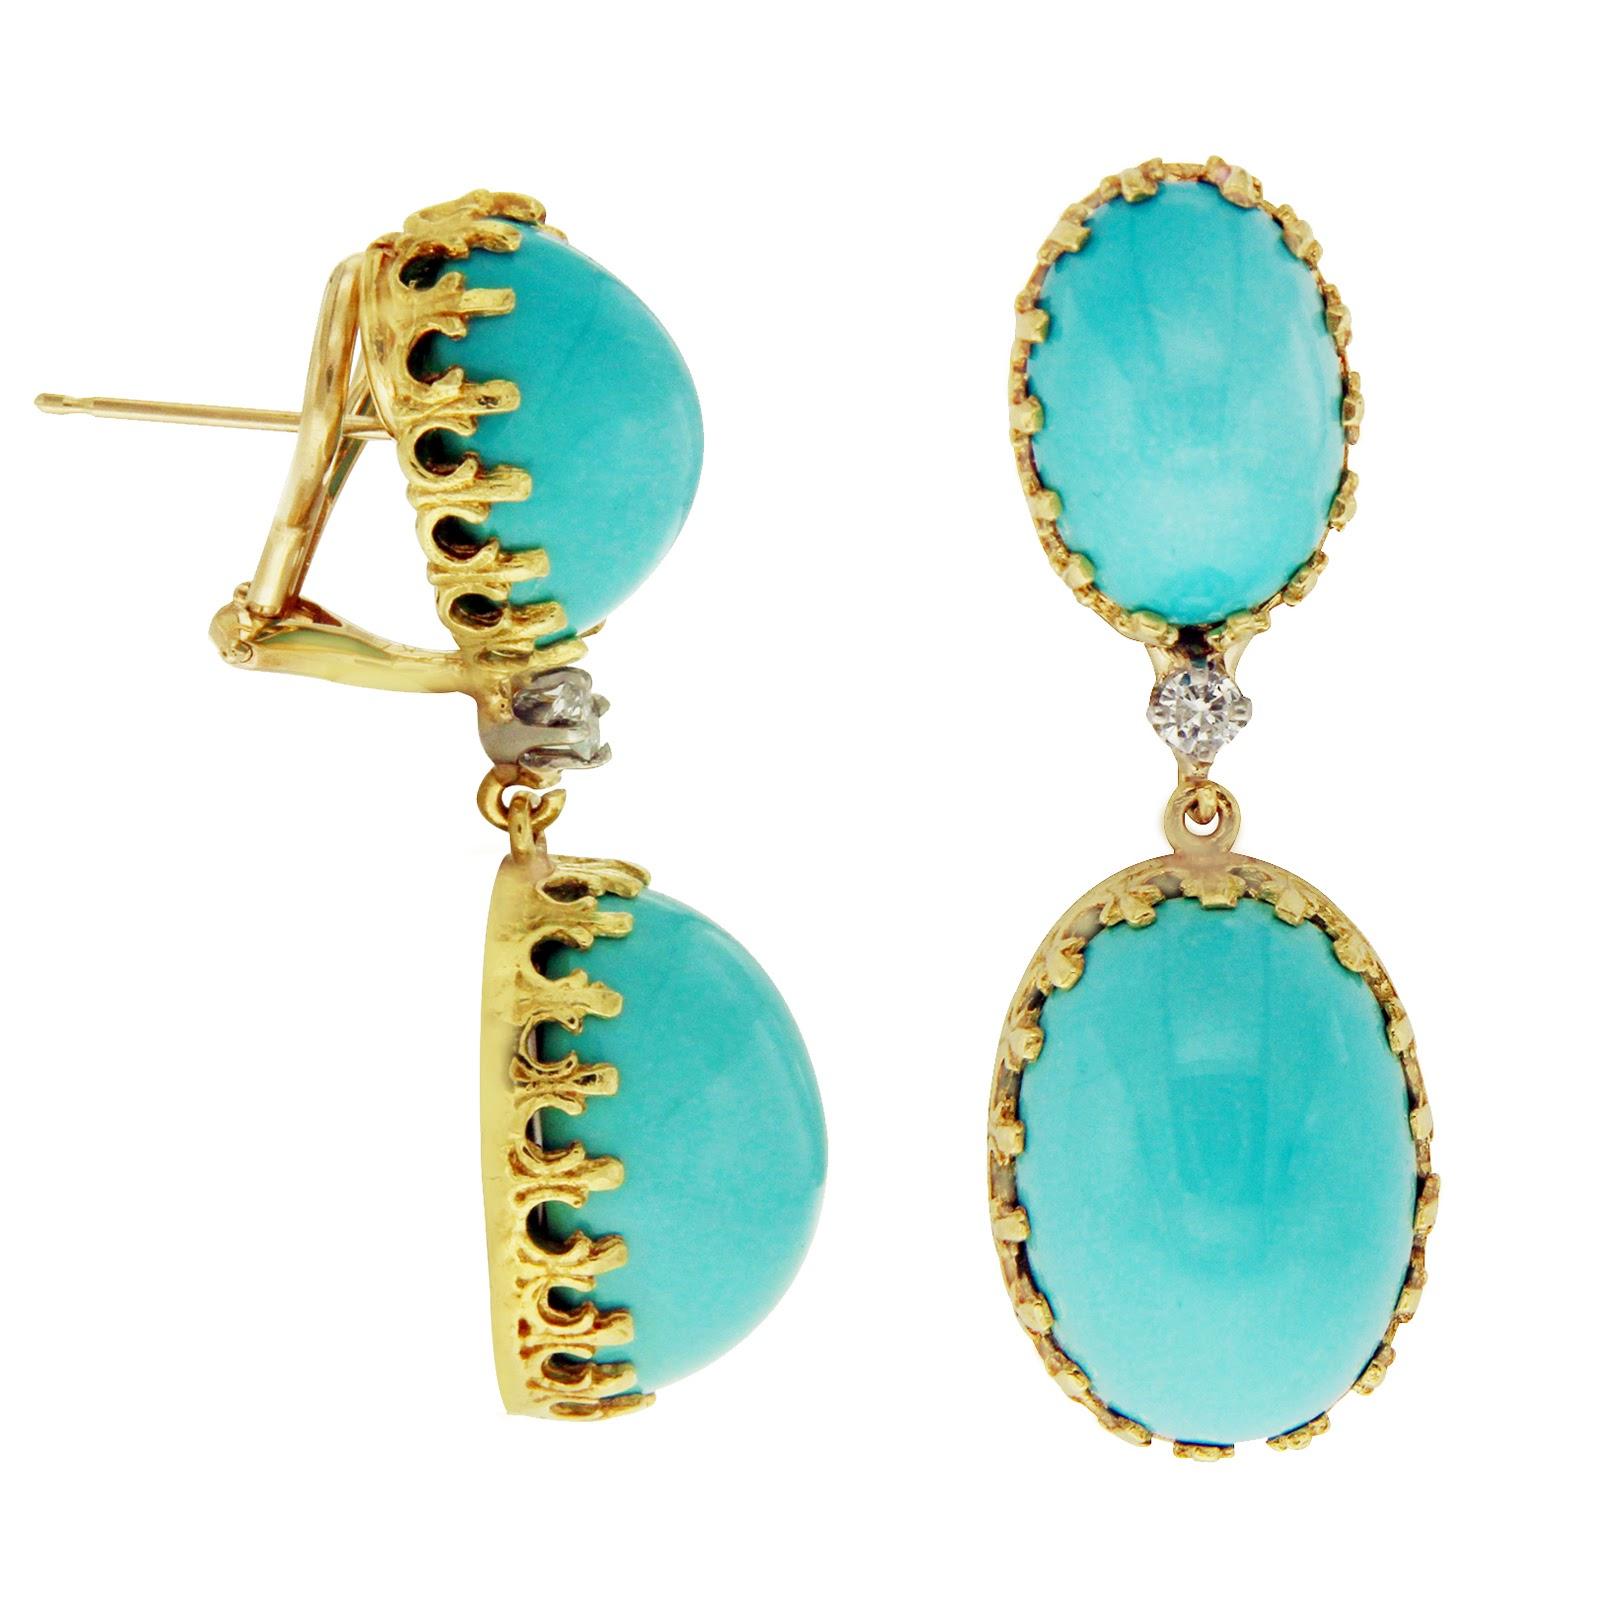 Type: Earrings
Height: 40 mm
Width: 15 mm
Metal: Yellow Gold
Metal Purity: 18K
Hallmarks: Cellino 750
Total Weight: 19.2 Gram
Stone Type: Diamonds & Turquoise 
Condition: Per-Owned 
Stock Number: U517